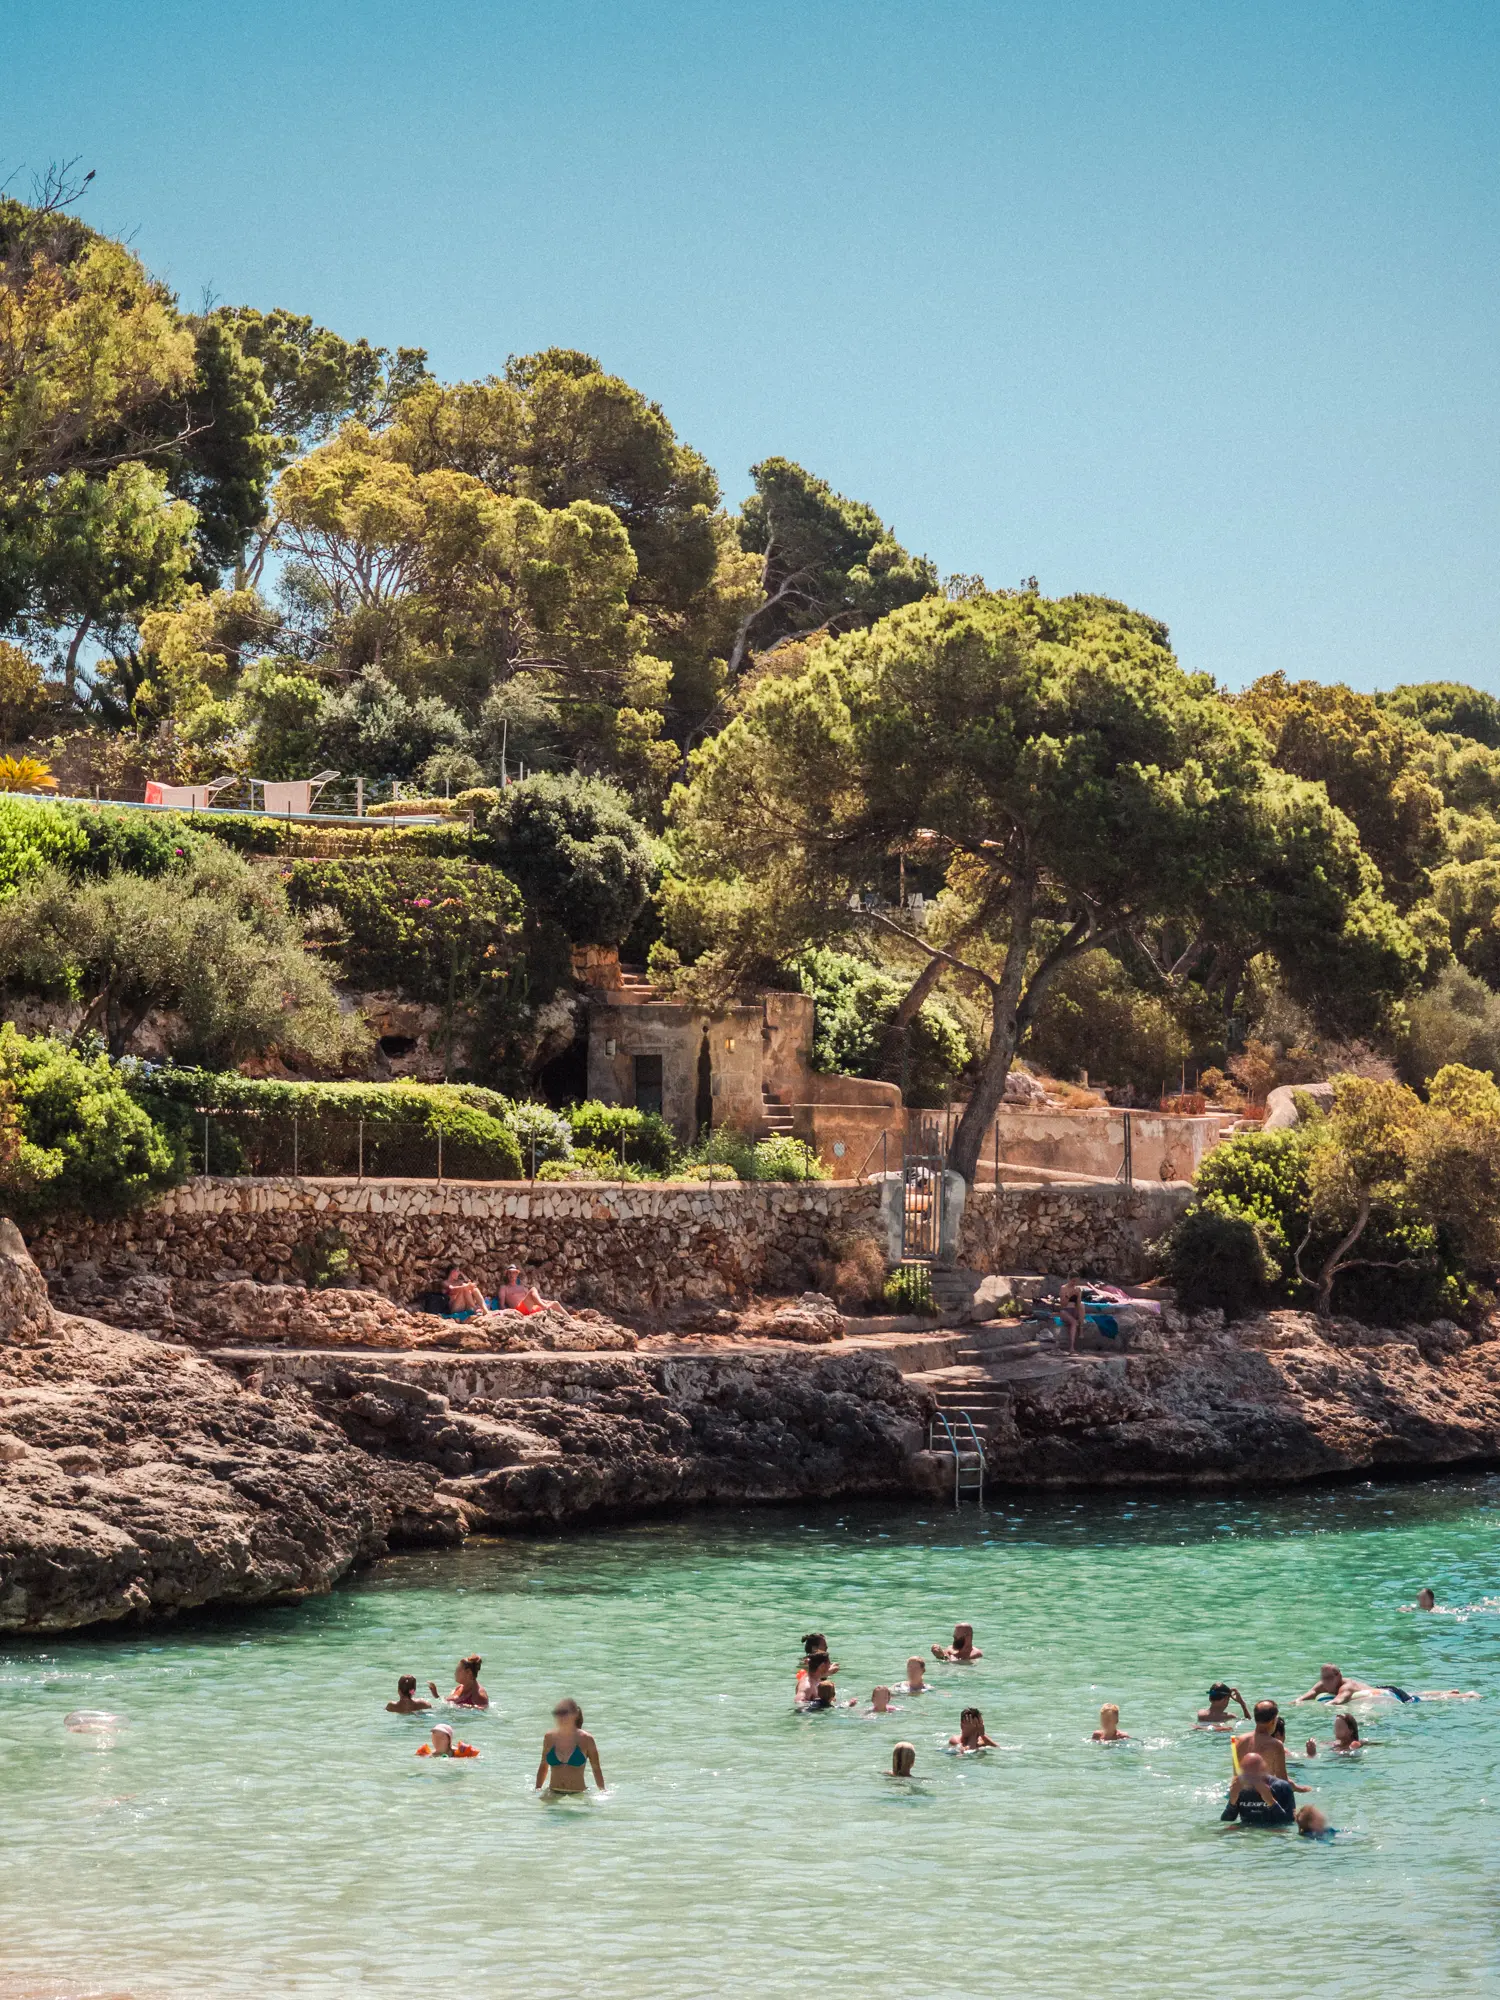 People in shallow green water with rocks and greenery in the background, Cala D'Or Mallorca.